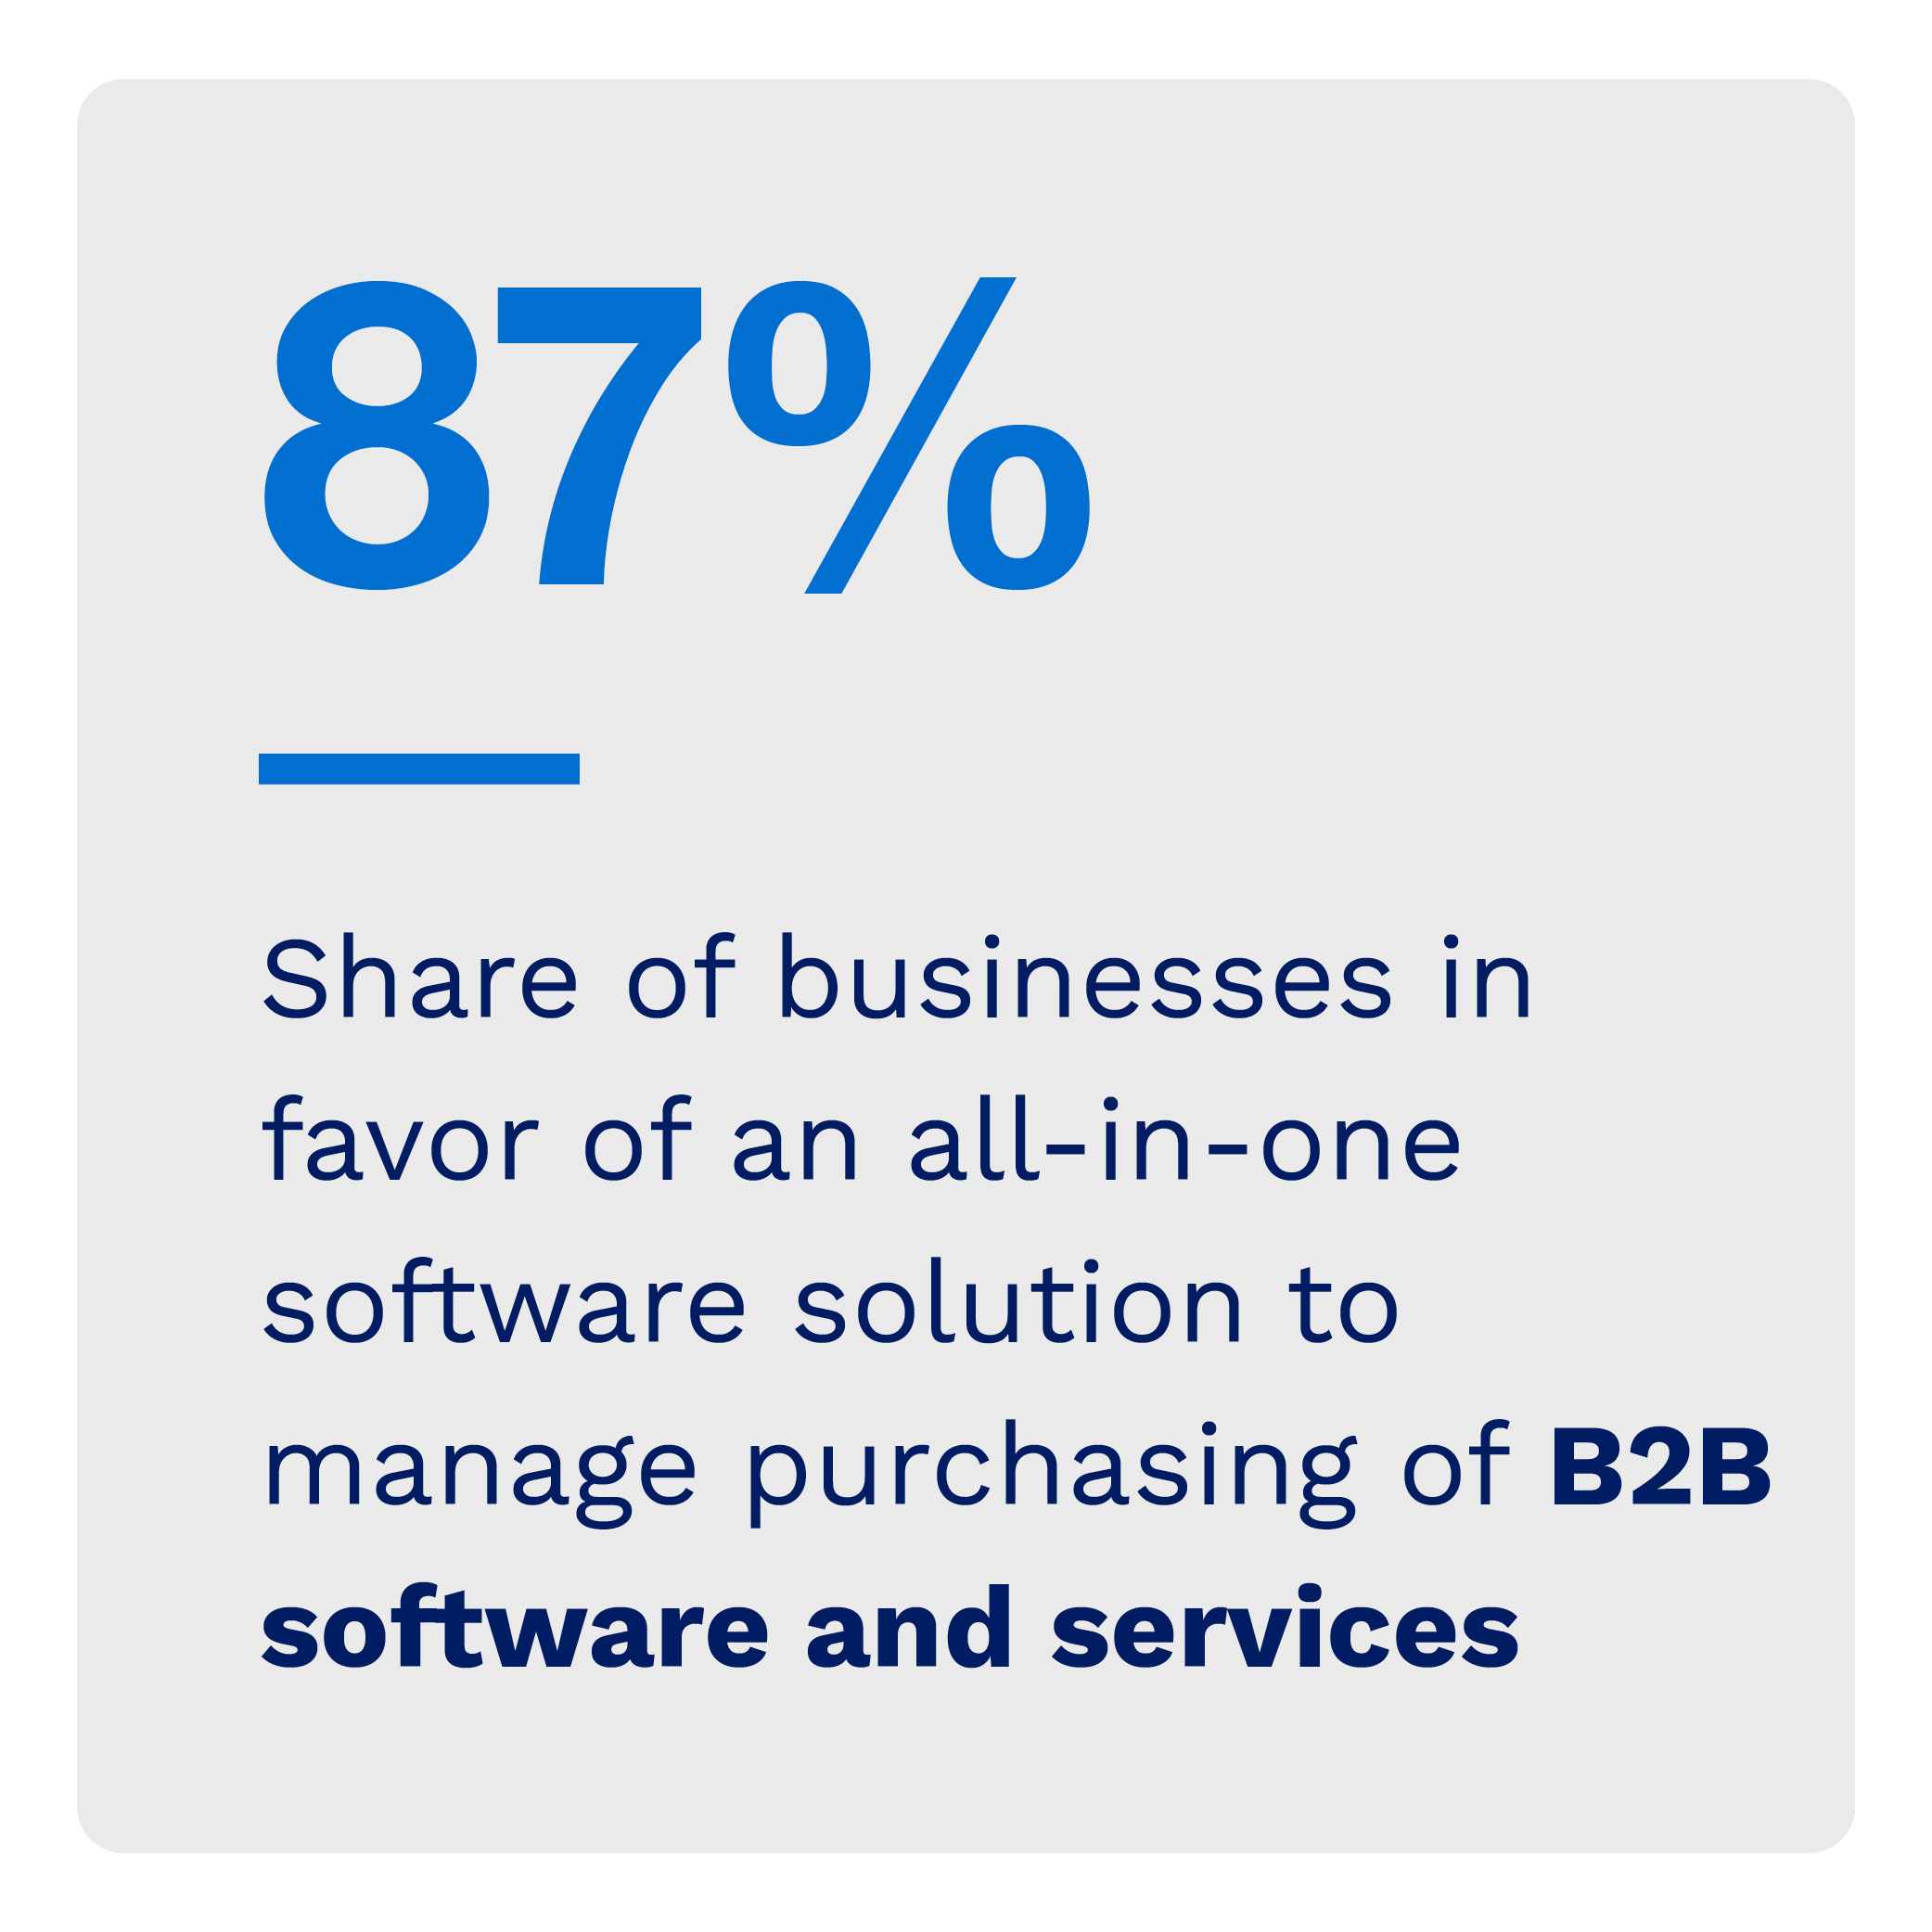 87%: Share of businesses in favor of an all-in-one software solution to manage purchasing of B2B software and services